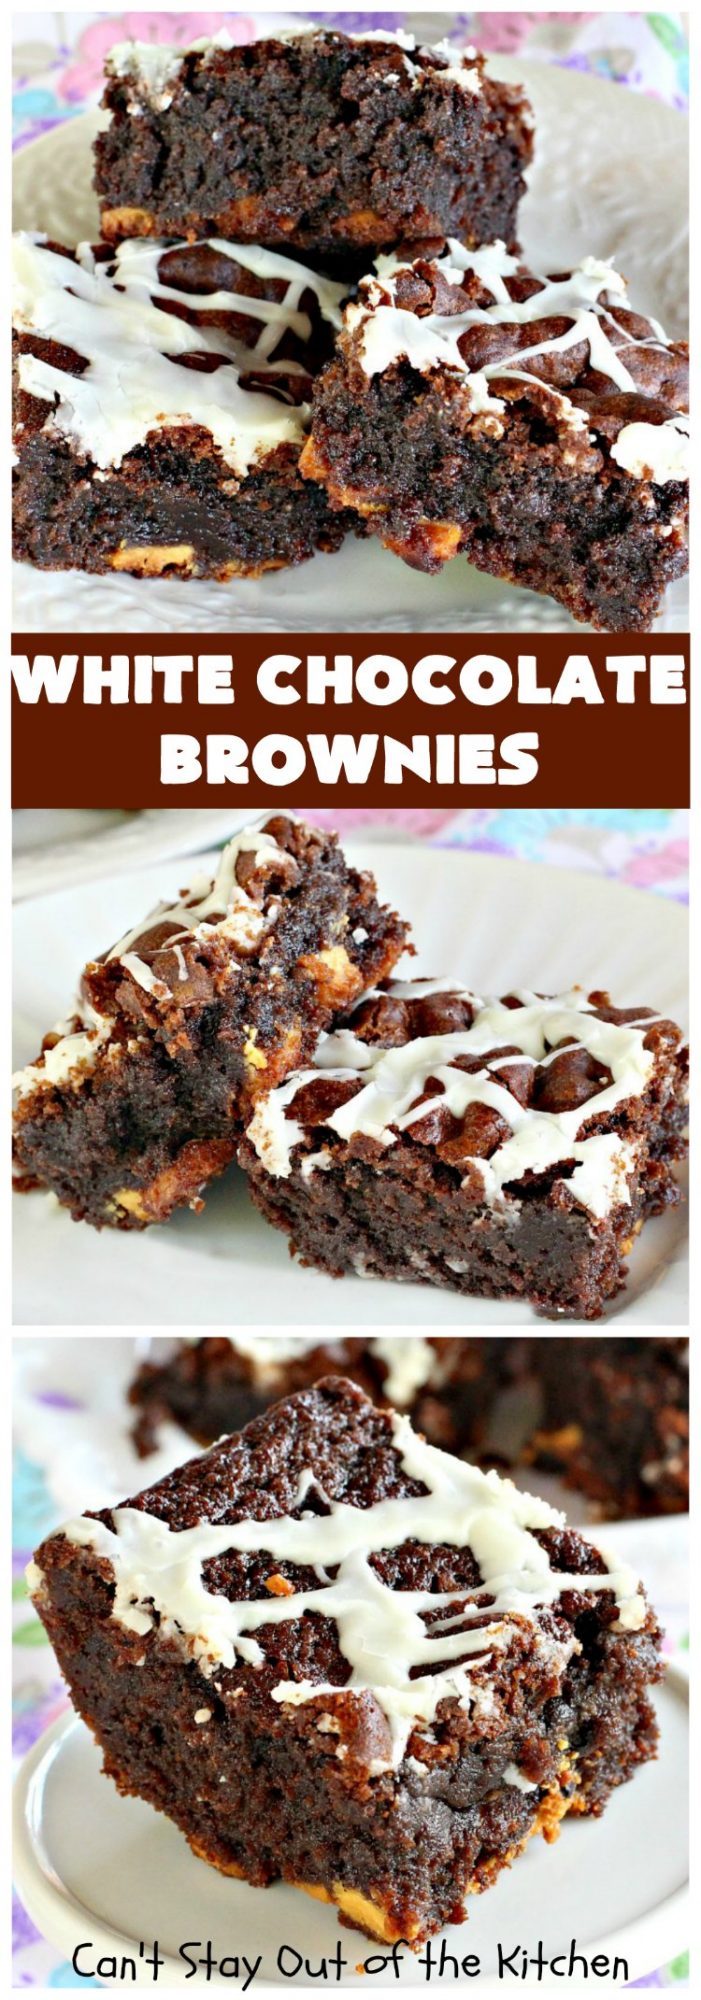 White Chocolate Brownies – Can't Stay Out of the Kitchen